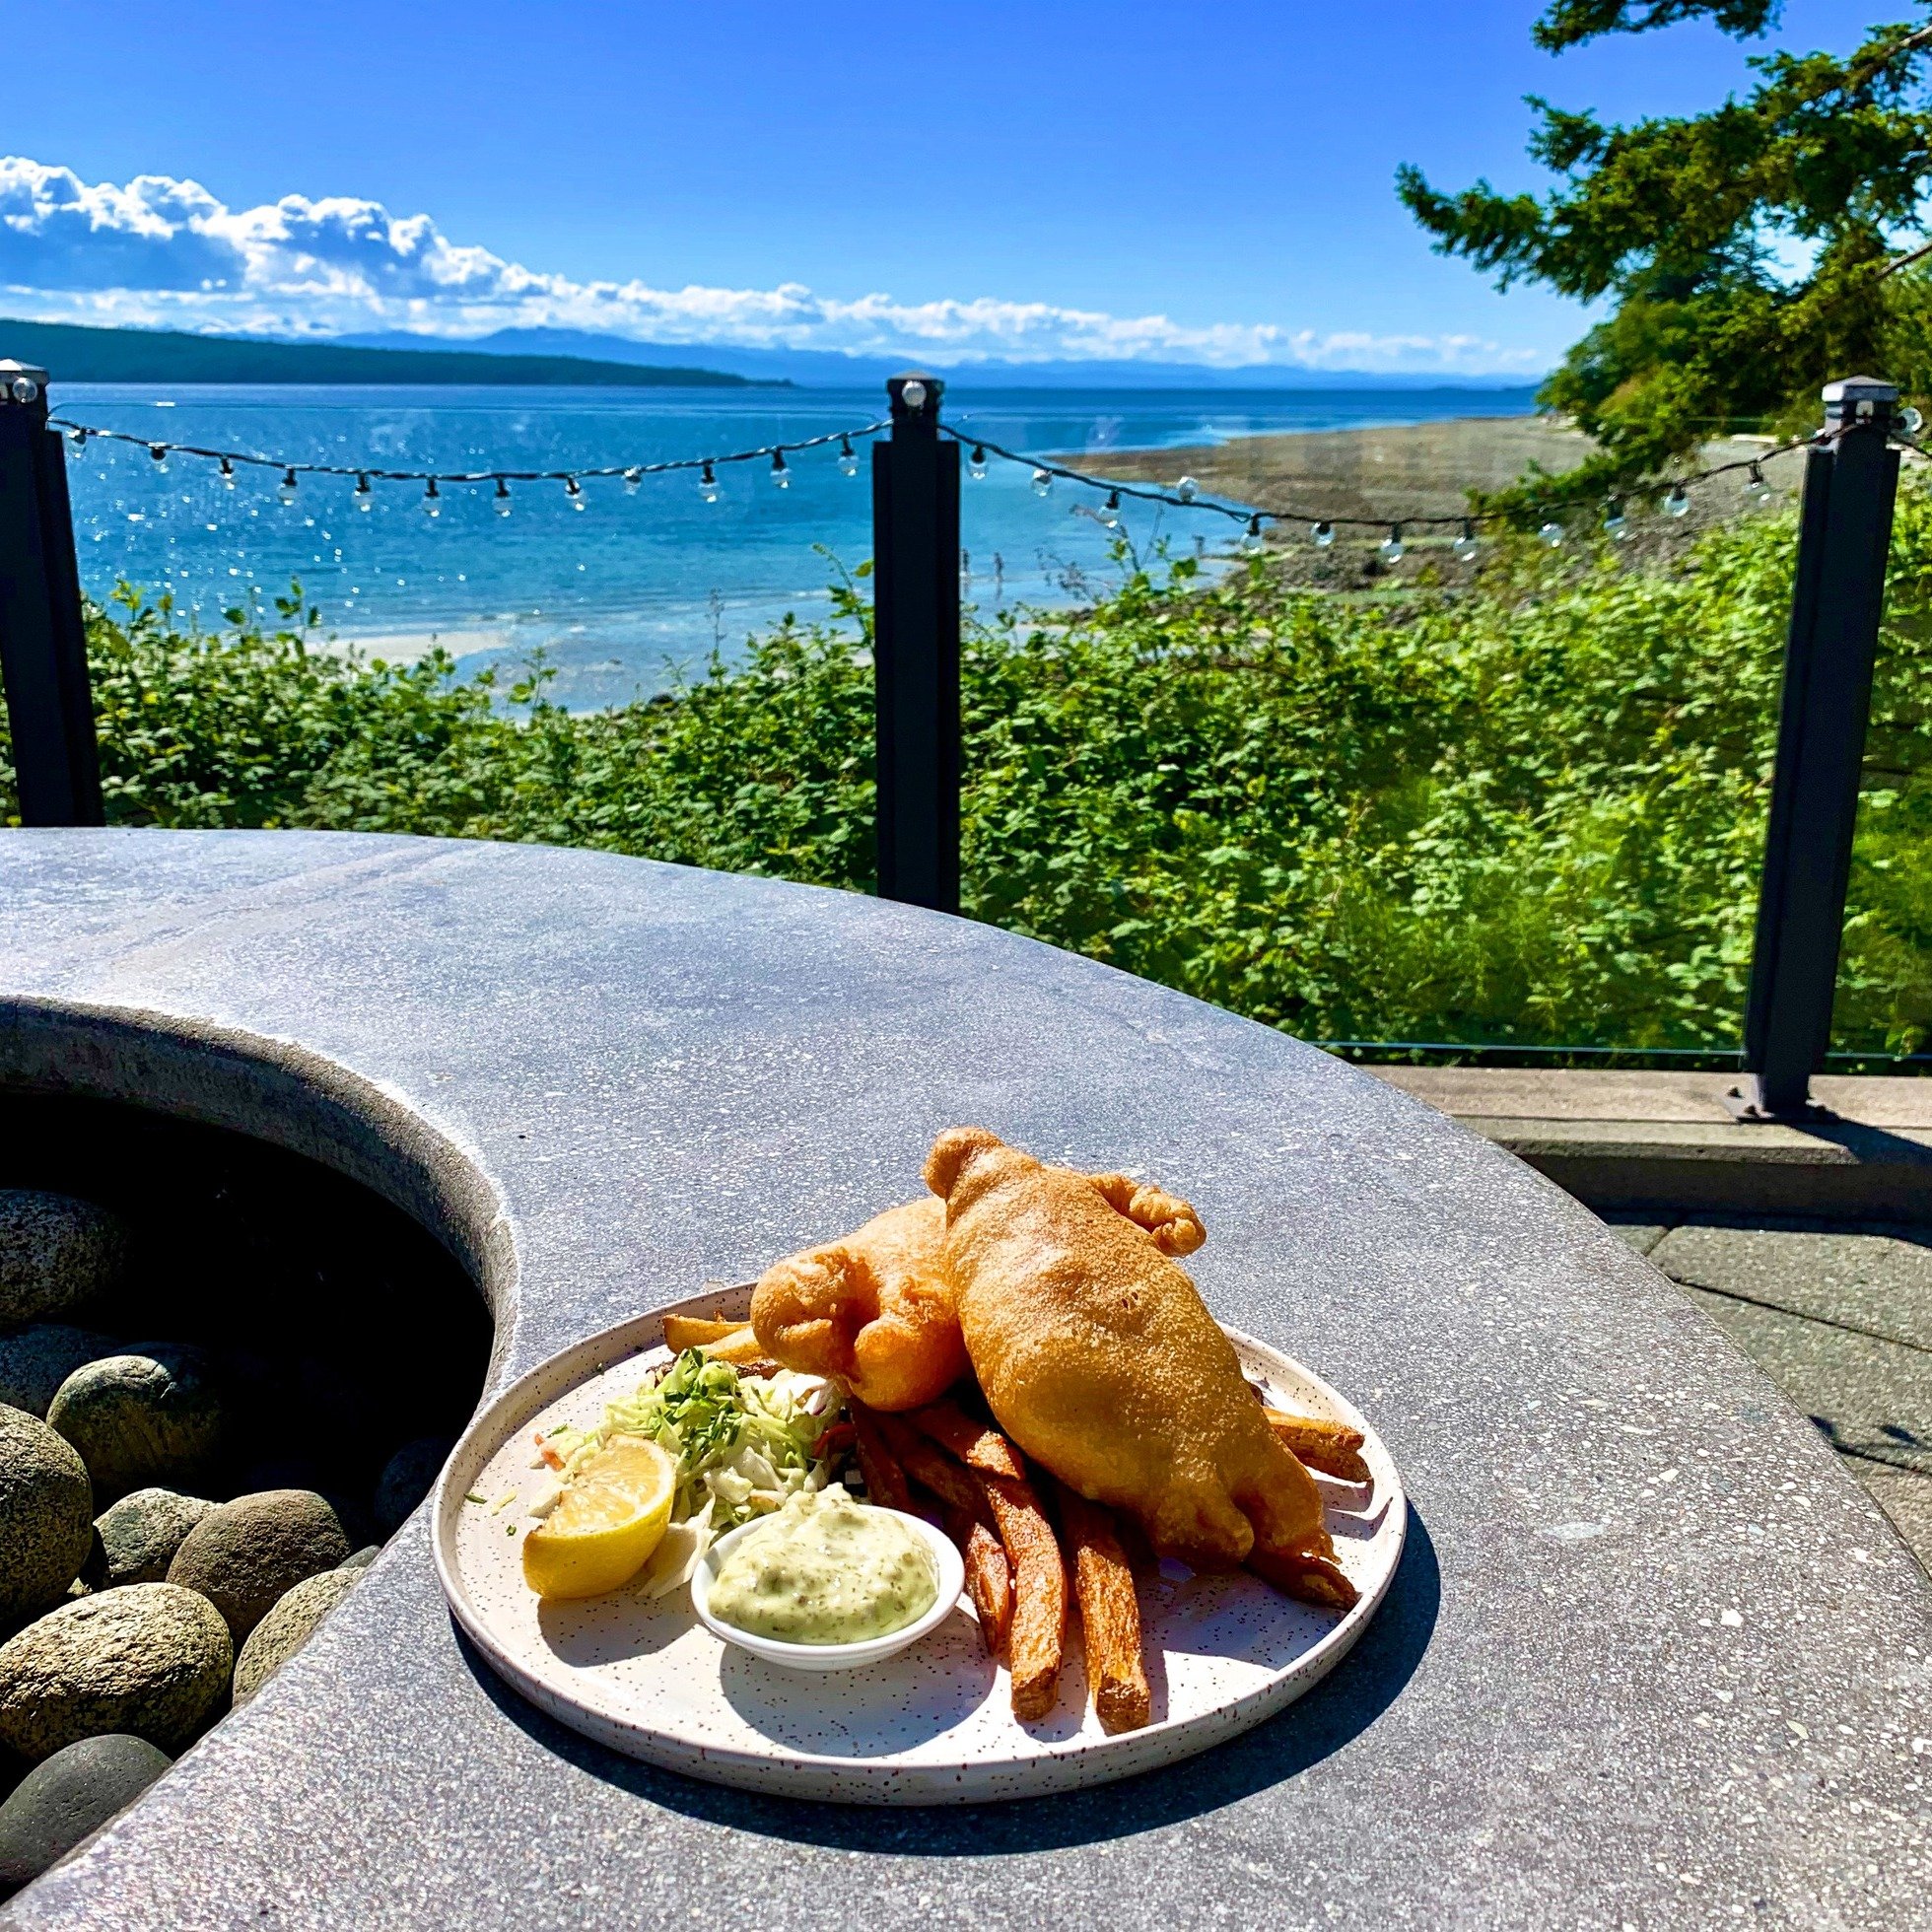 It's Tuesday, which means you can enjoy our Fish &amp; Chips for only $22! 🎣 Line-caught Ling Cod, served with fries + coleslaw, yum 🤤

😎 Our patio is NOW open, weather permitting. Join us tonight for a delicious dinner on Powell River's Best Pati